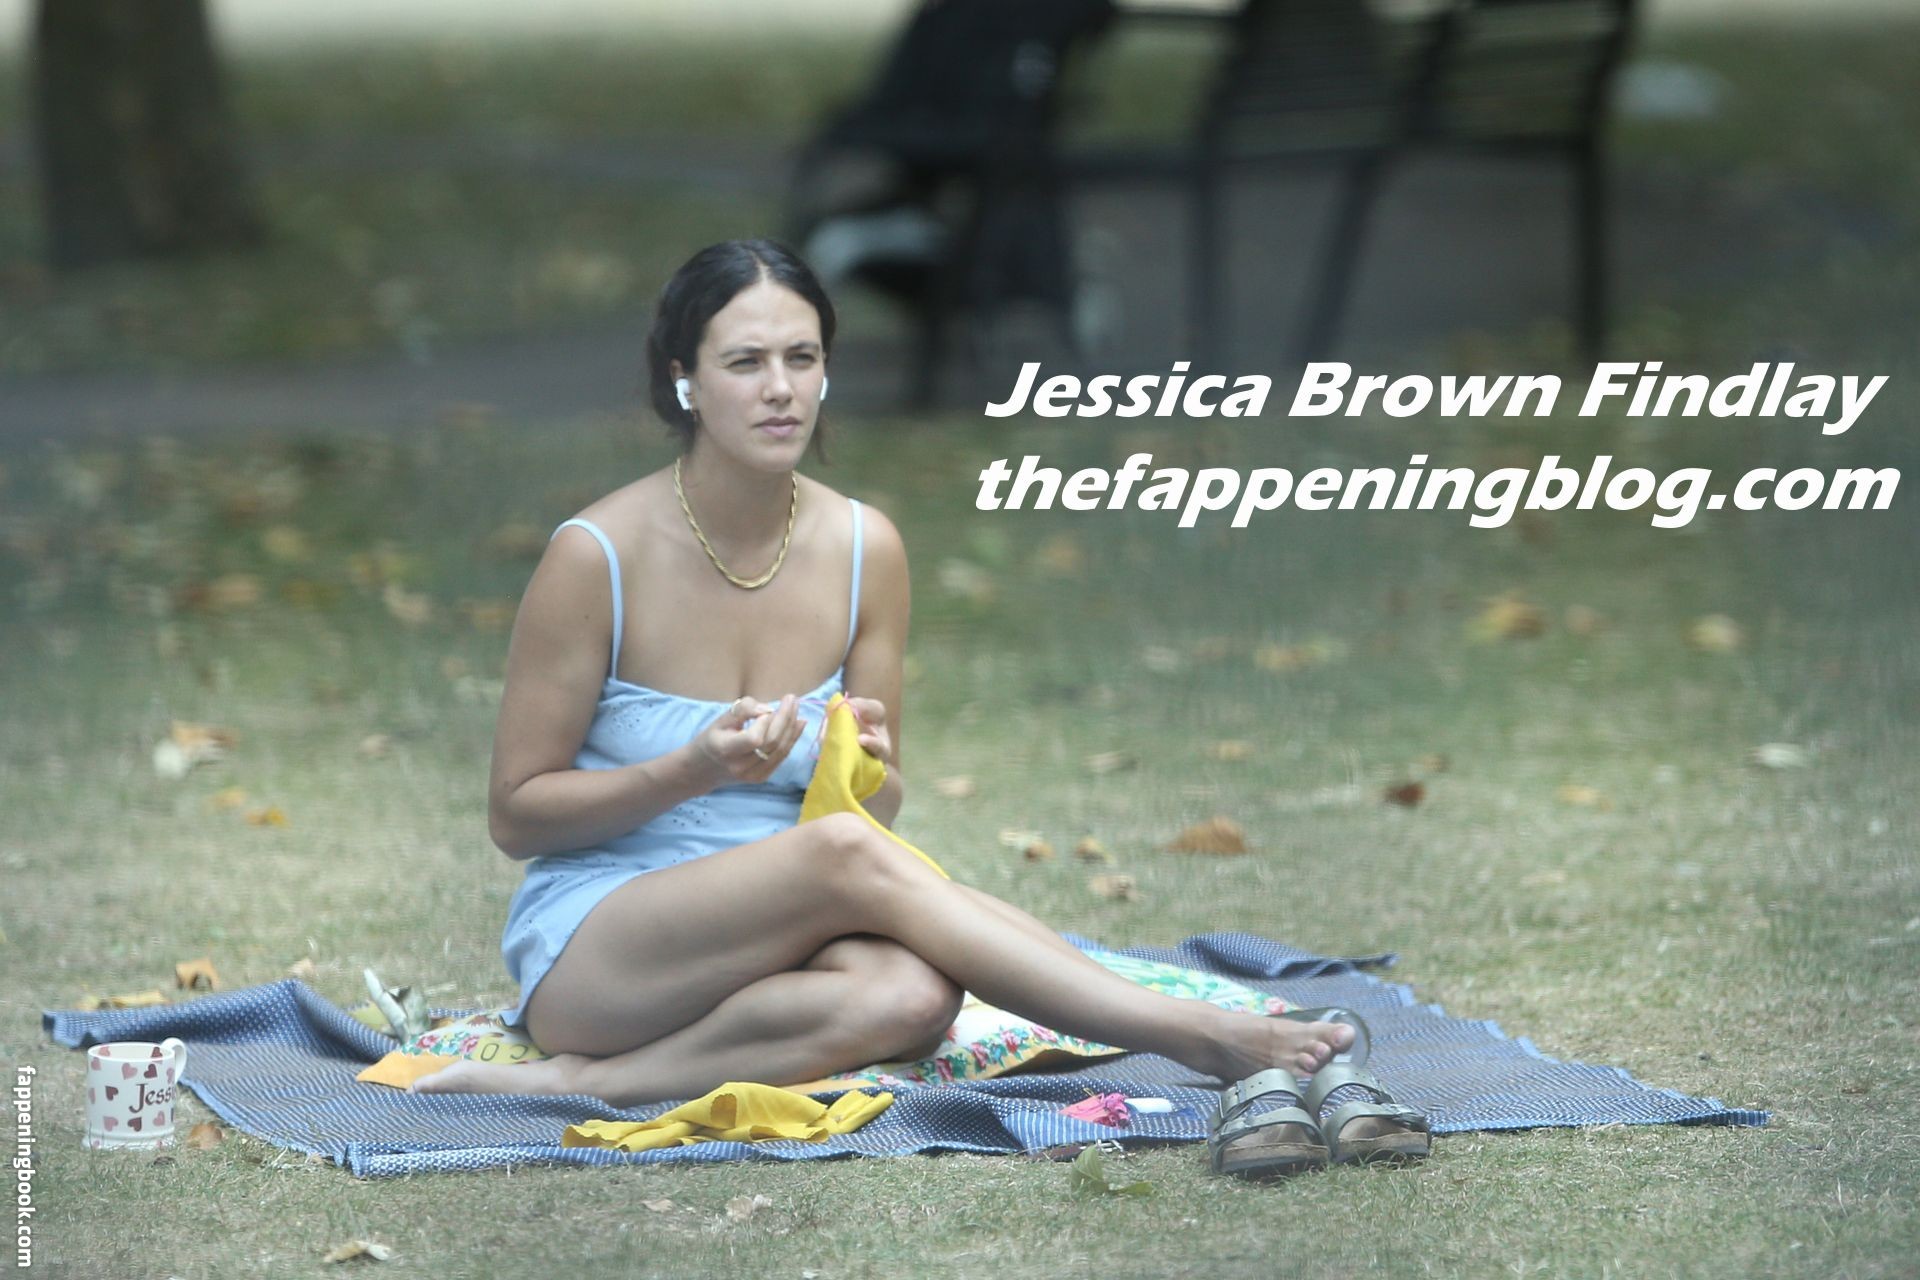 Findlay fappening brown jessica Downton Abbey: